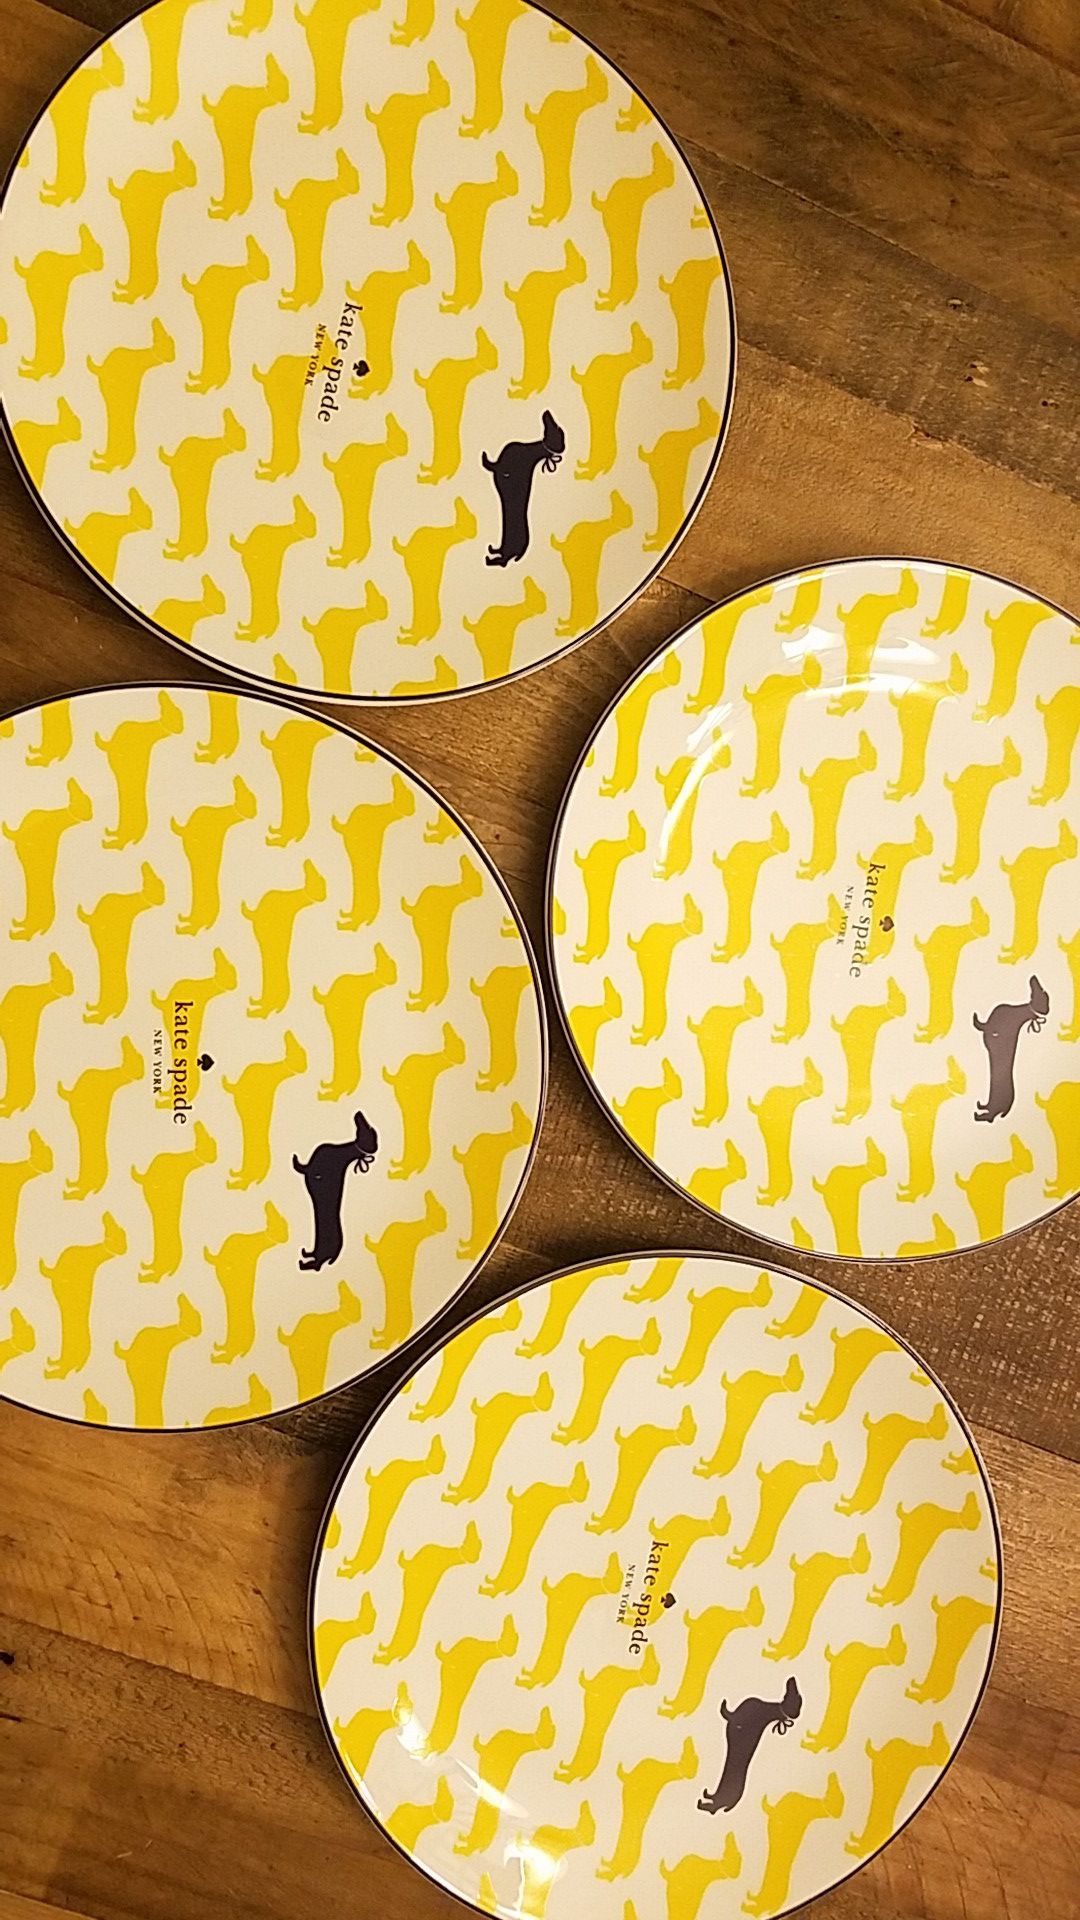 Lenox Kate Spade Dachshund Accent Plates for Sale in Kyle, TX - OfferUp